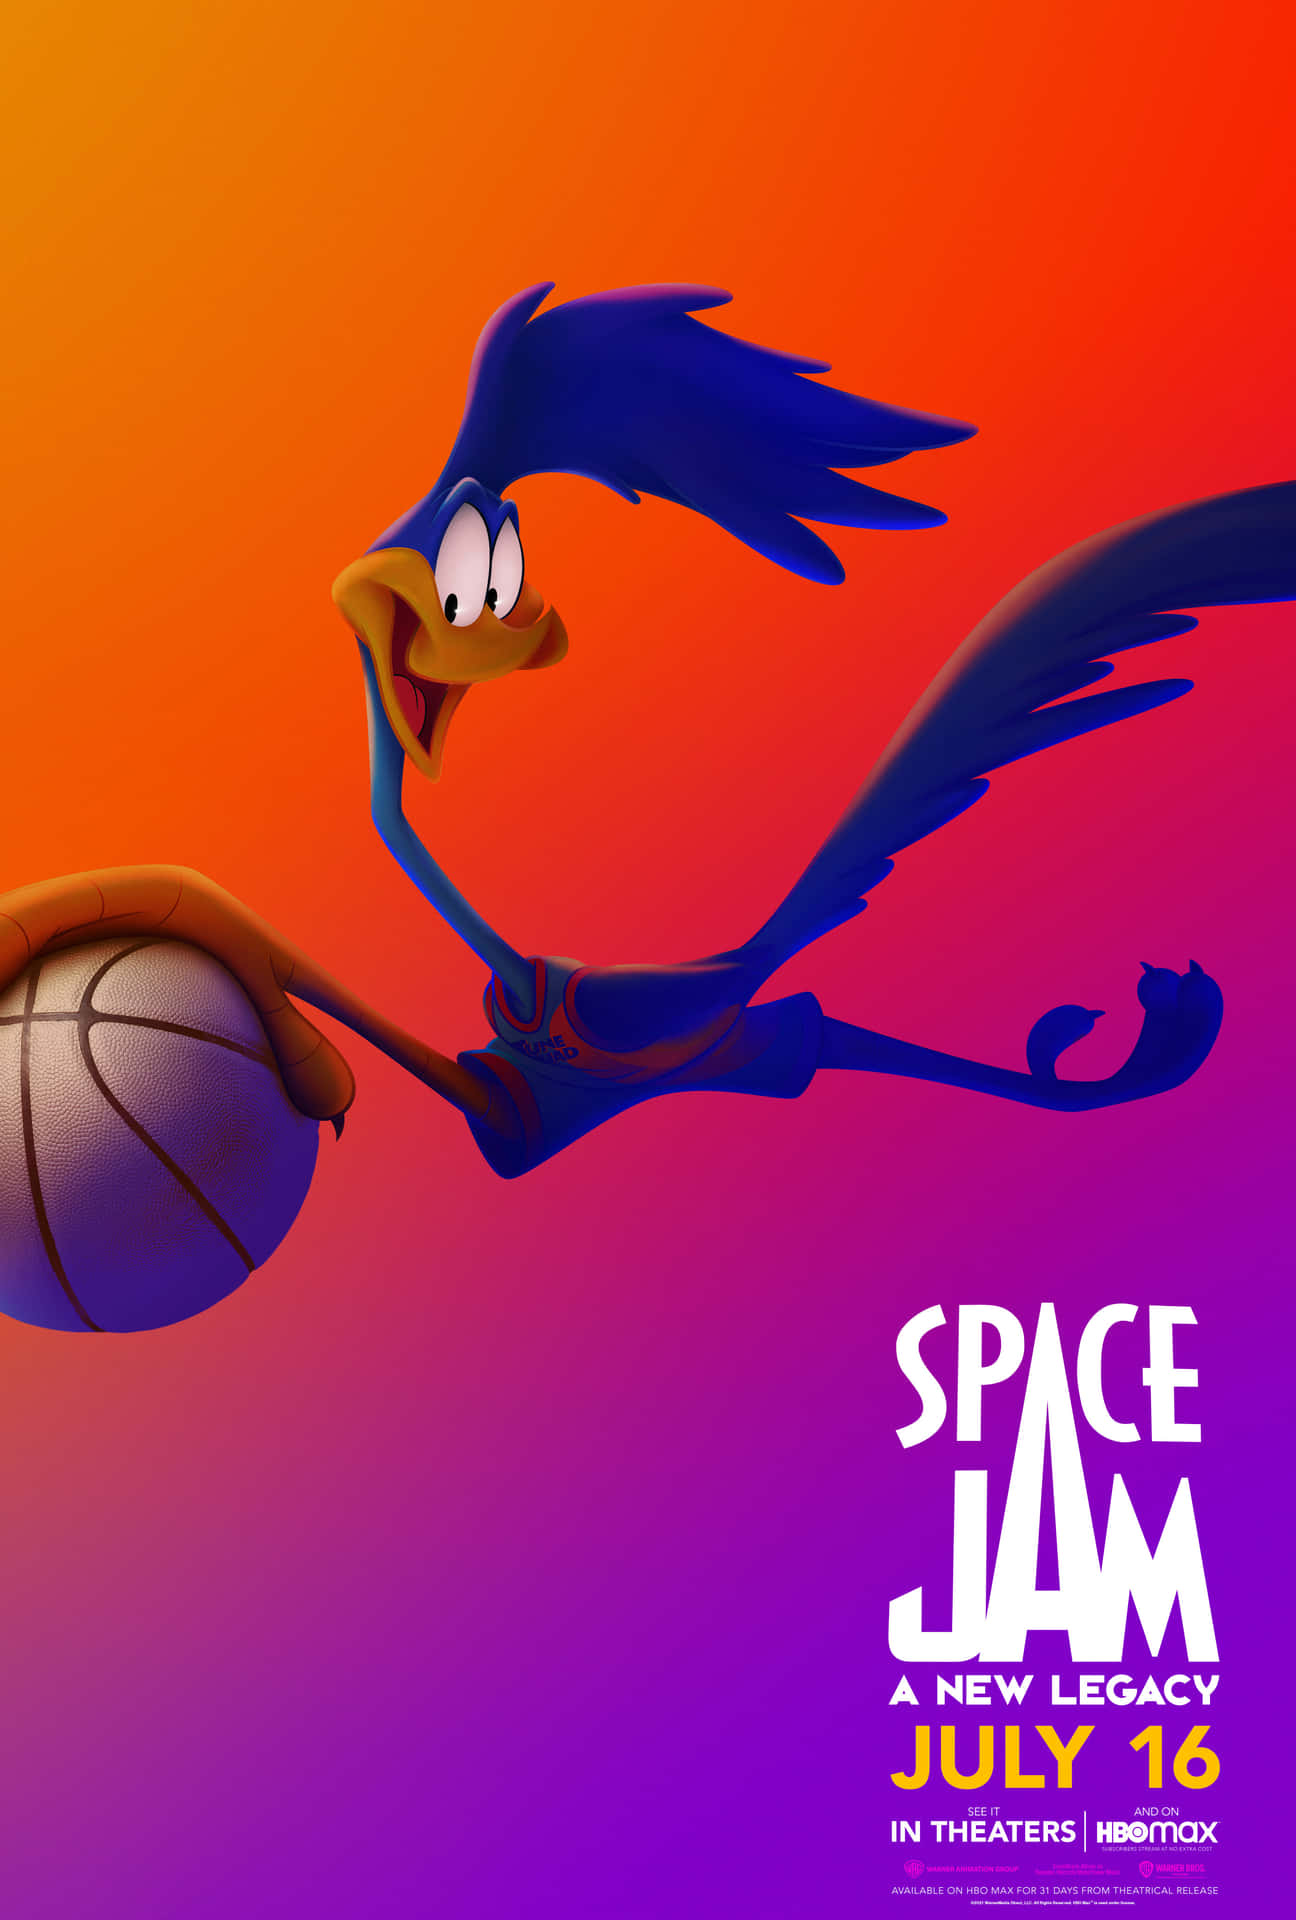 Exciting Collision Of Two Worlds In Space Jam: A New Legacy. Wallpaper